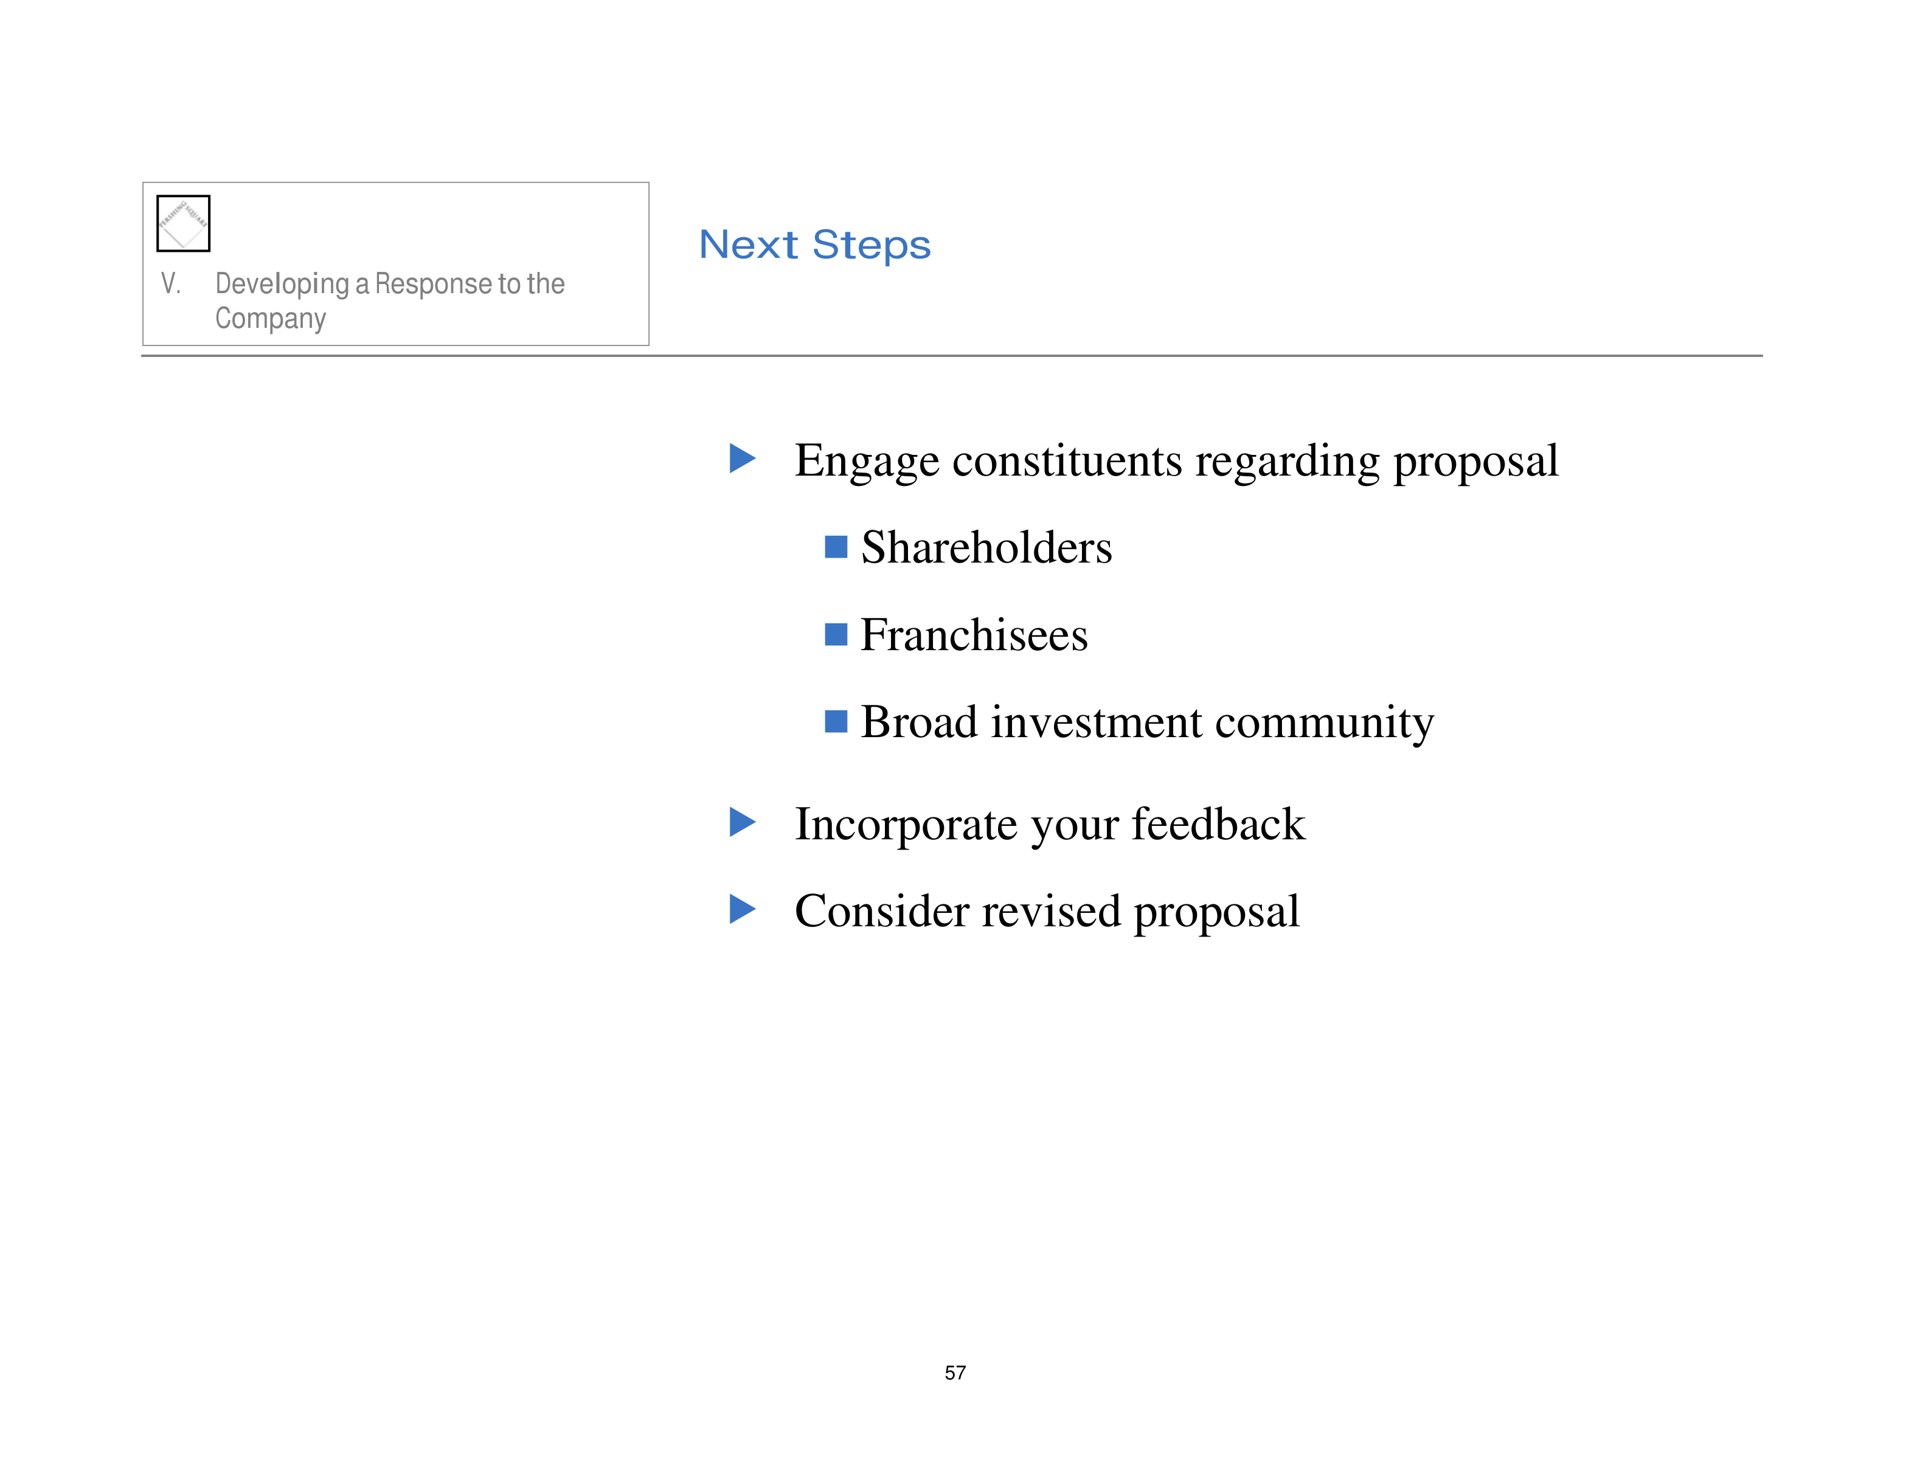 next steps engage constituents regarding proposal shareholders franchisees broad investment community incorporate your feedback consider revised proposal | Pershing Square